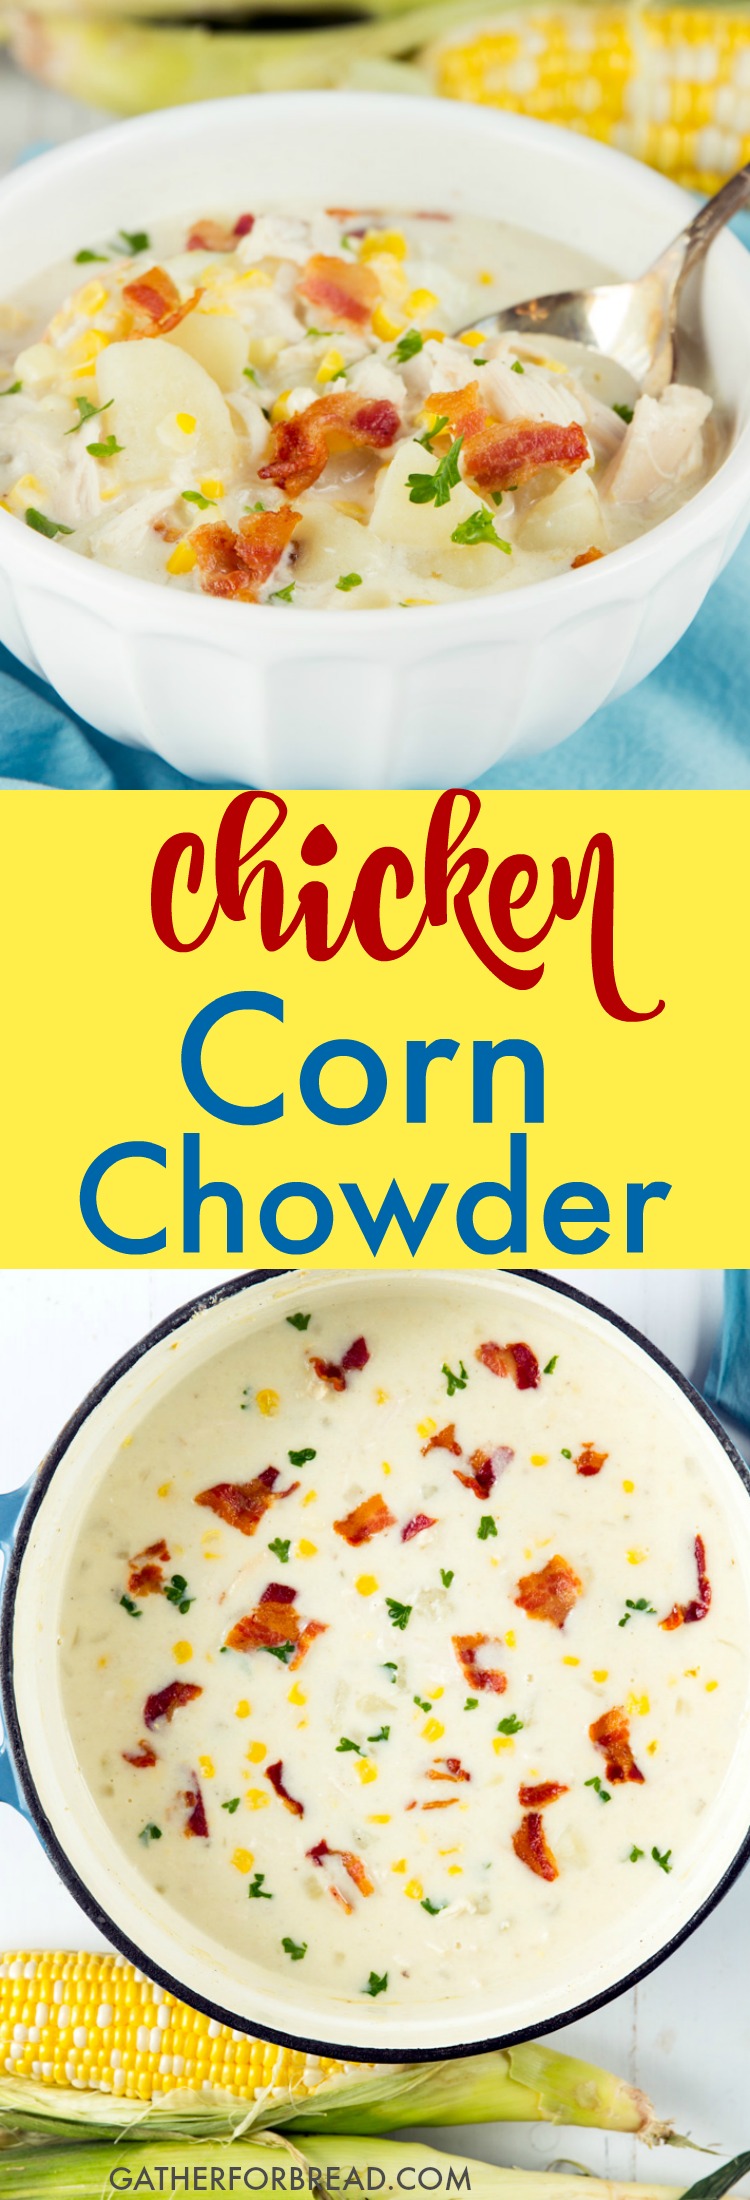 Chicken Corn Chowder - Creamy corn chowder loaded with bacon, sweet fresh corn, rotisserie chicken, loaded with flavor, this is sure to be a hit with your crowd especially in the summer. // gatherforbread.com